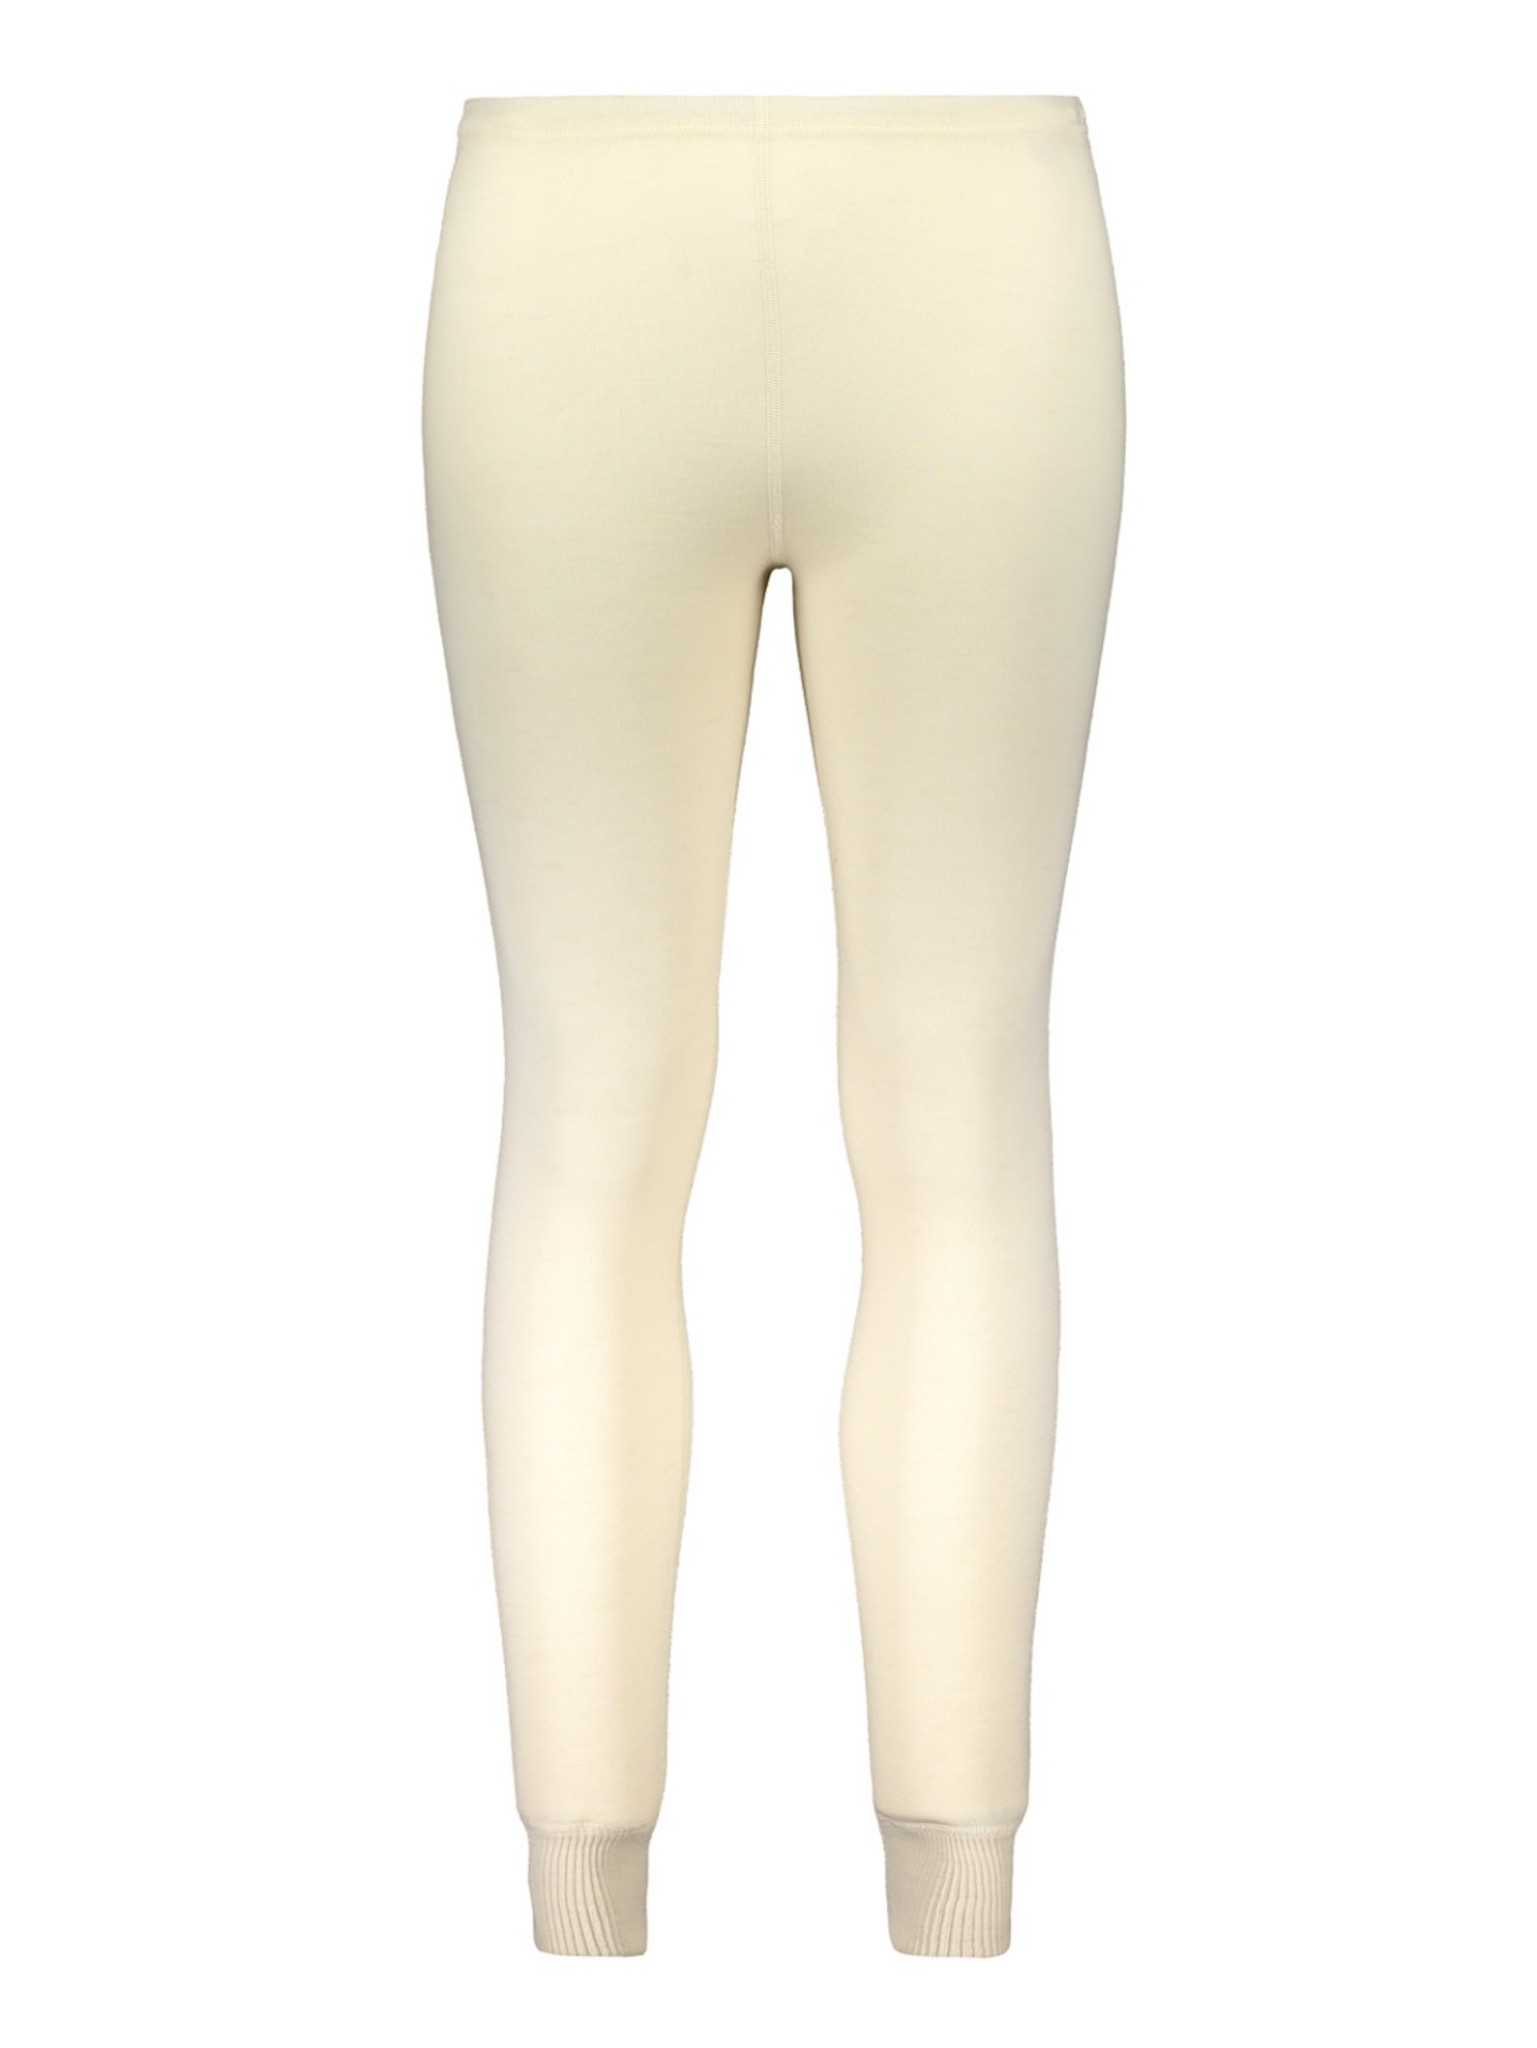 Womens Wool Leggings From 100% Natural Undyed Wool, Long